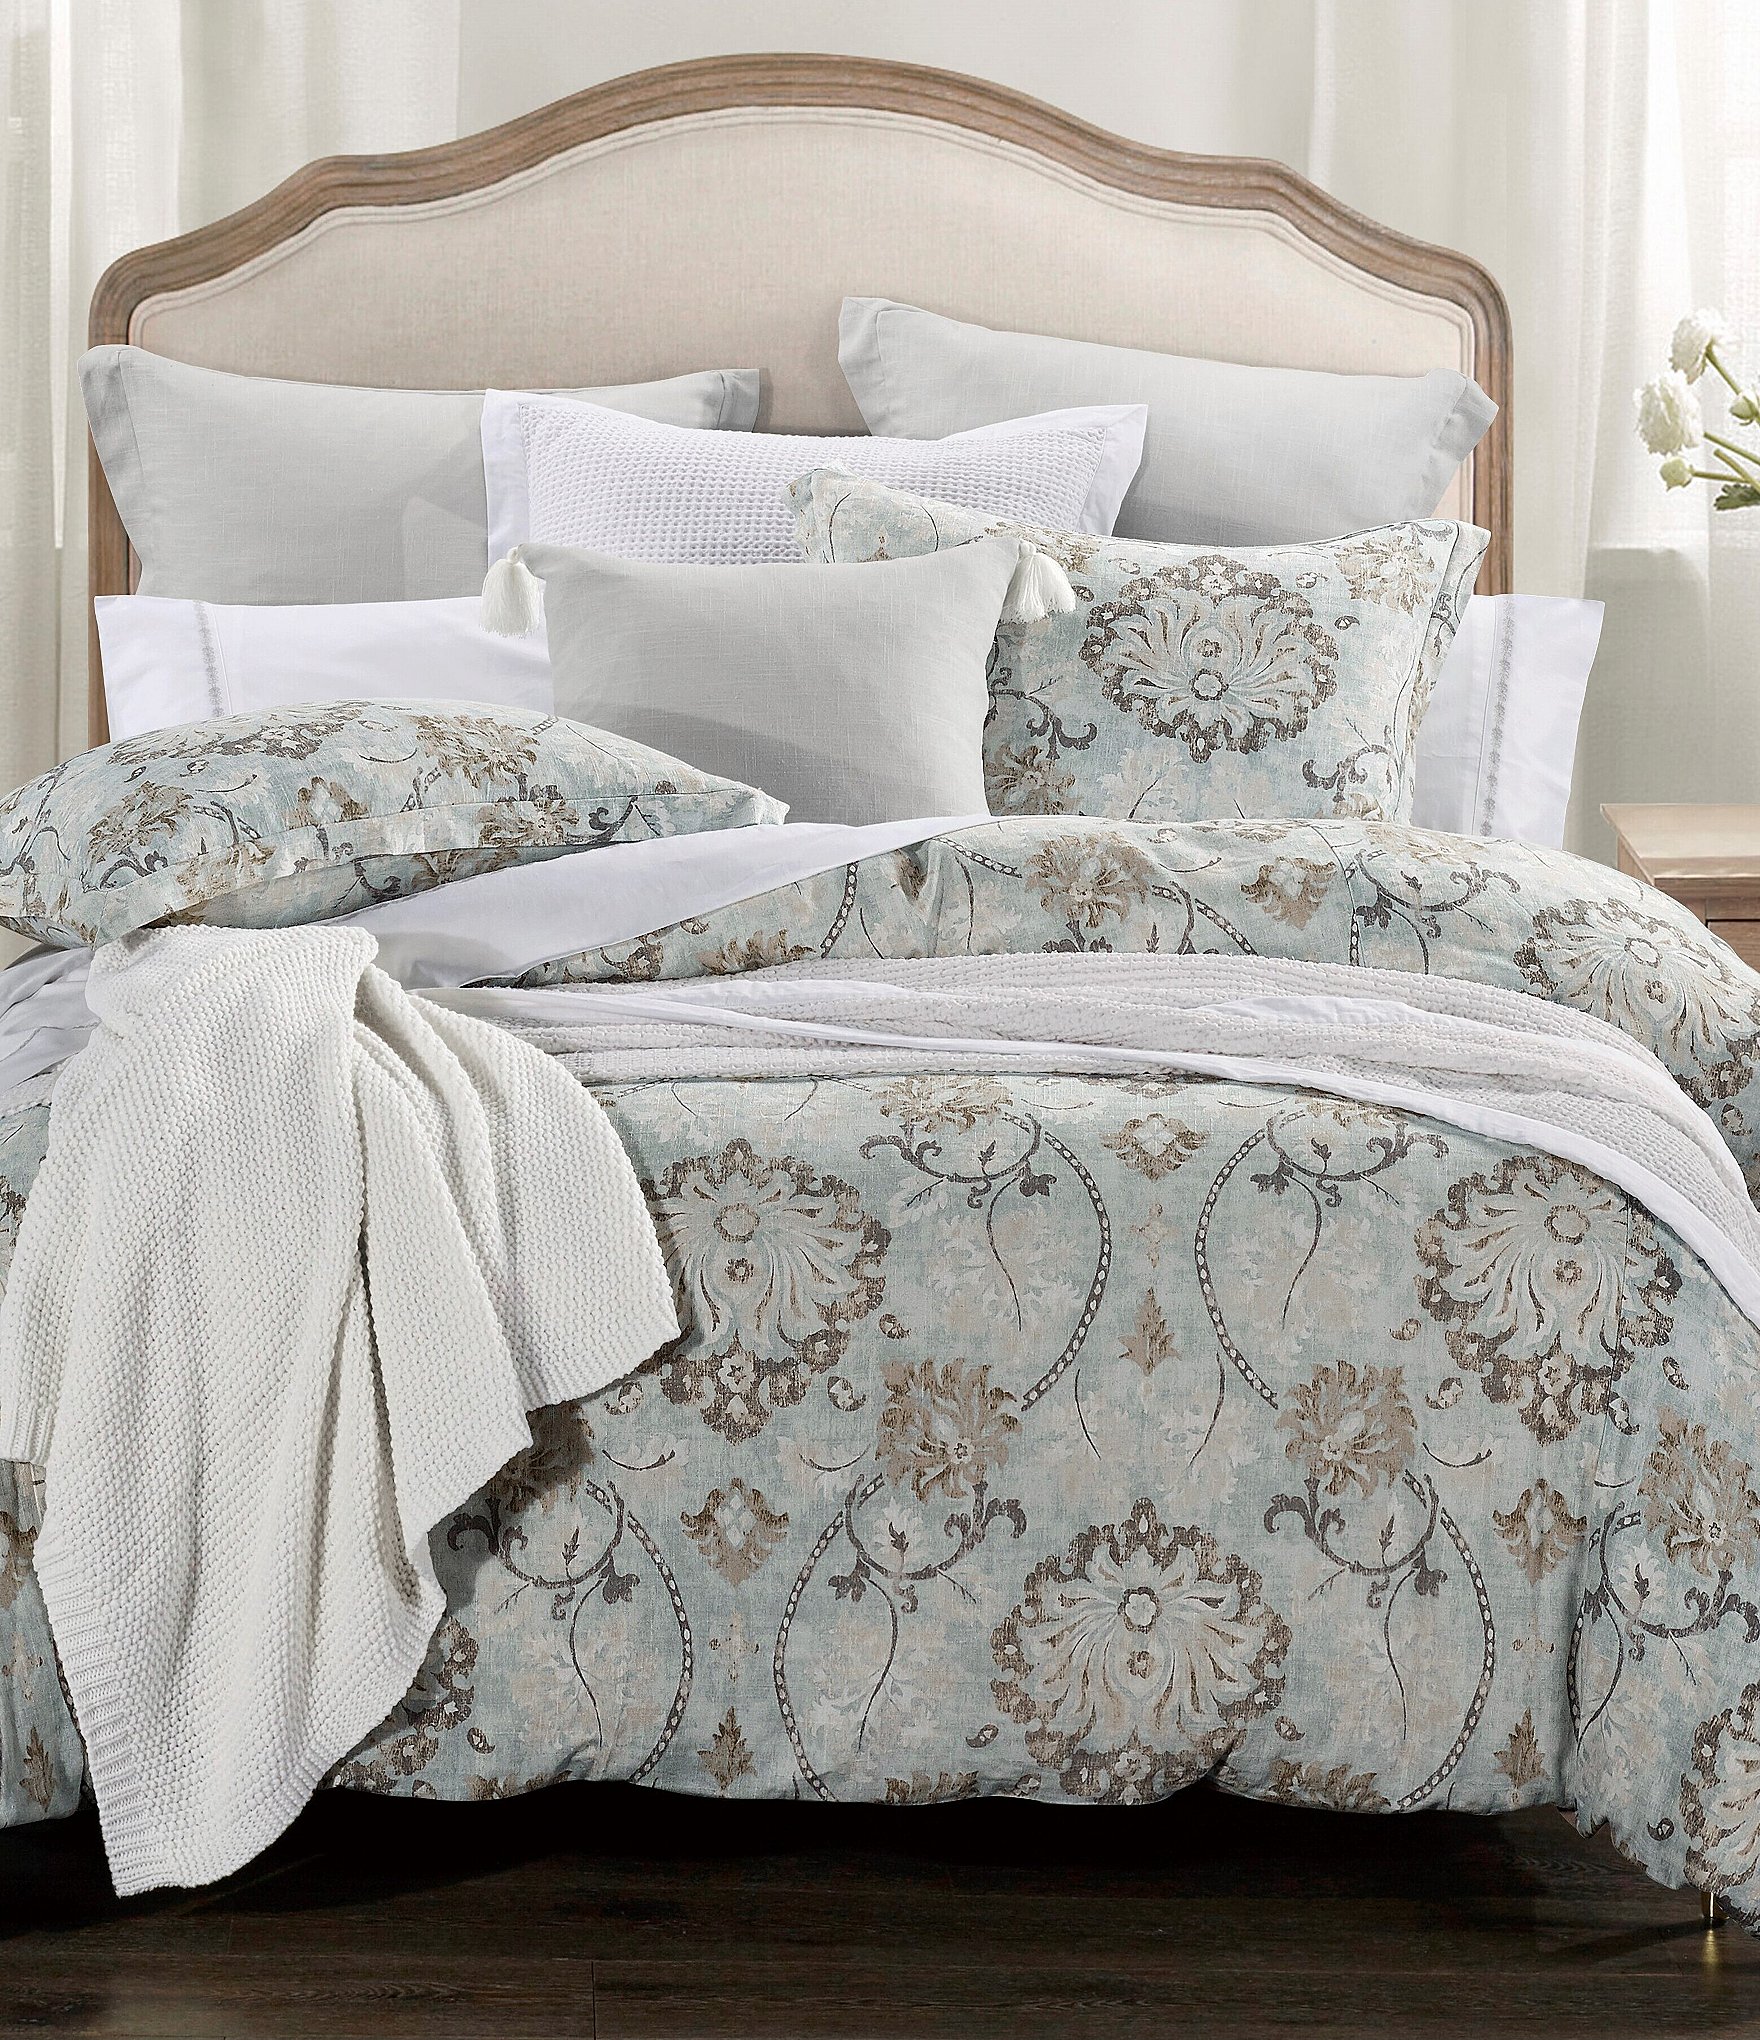 HiEnd Accents Victoria 3-Piece King Comforter Set in Gray, Cream, Tan,  Light Blue and Rust